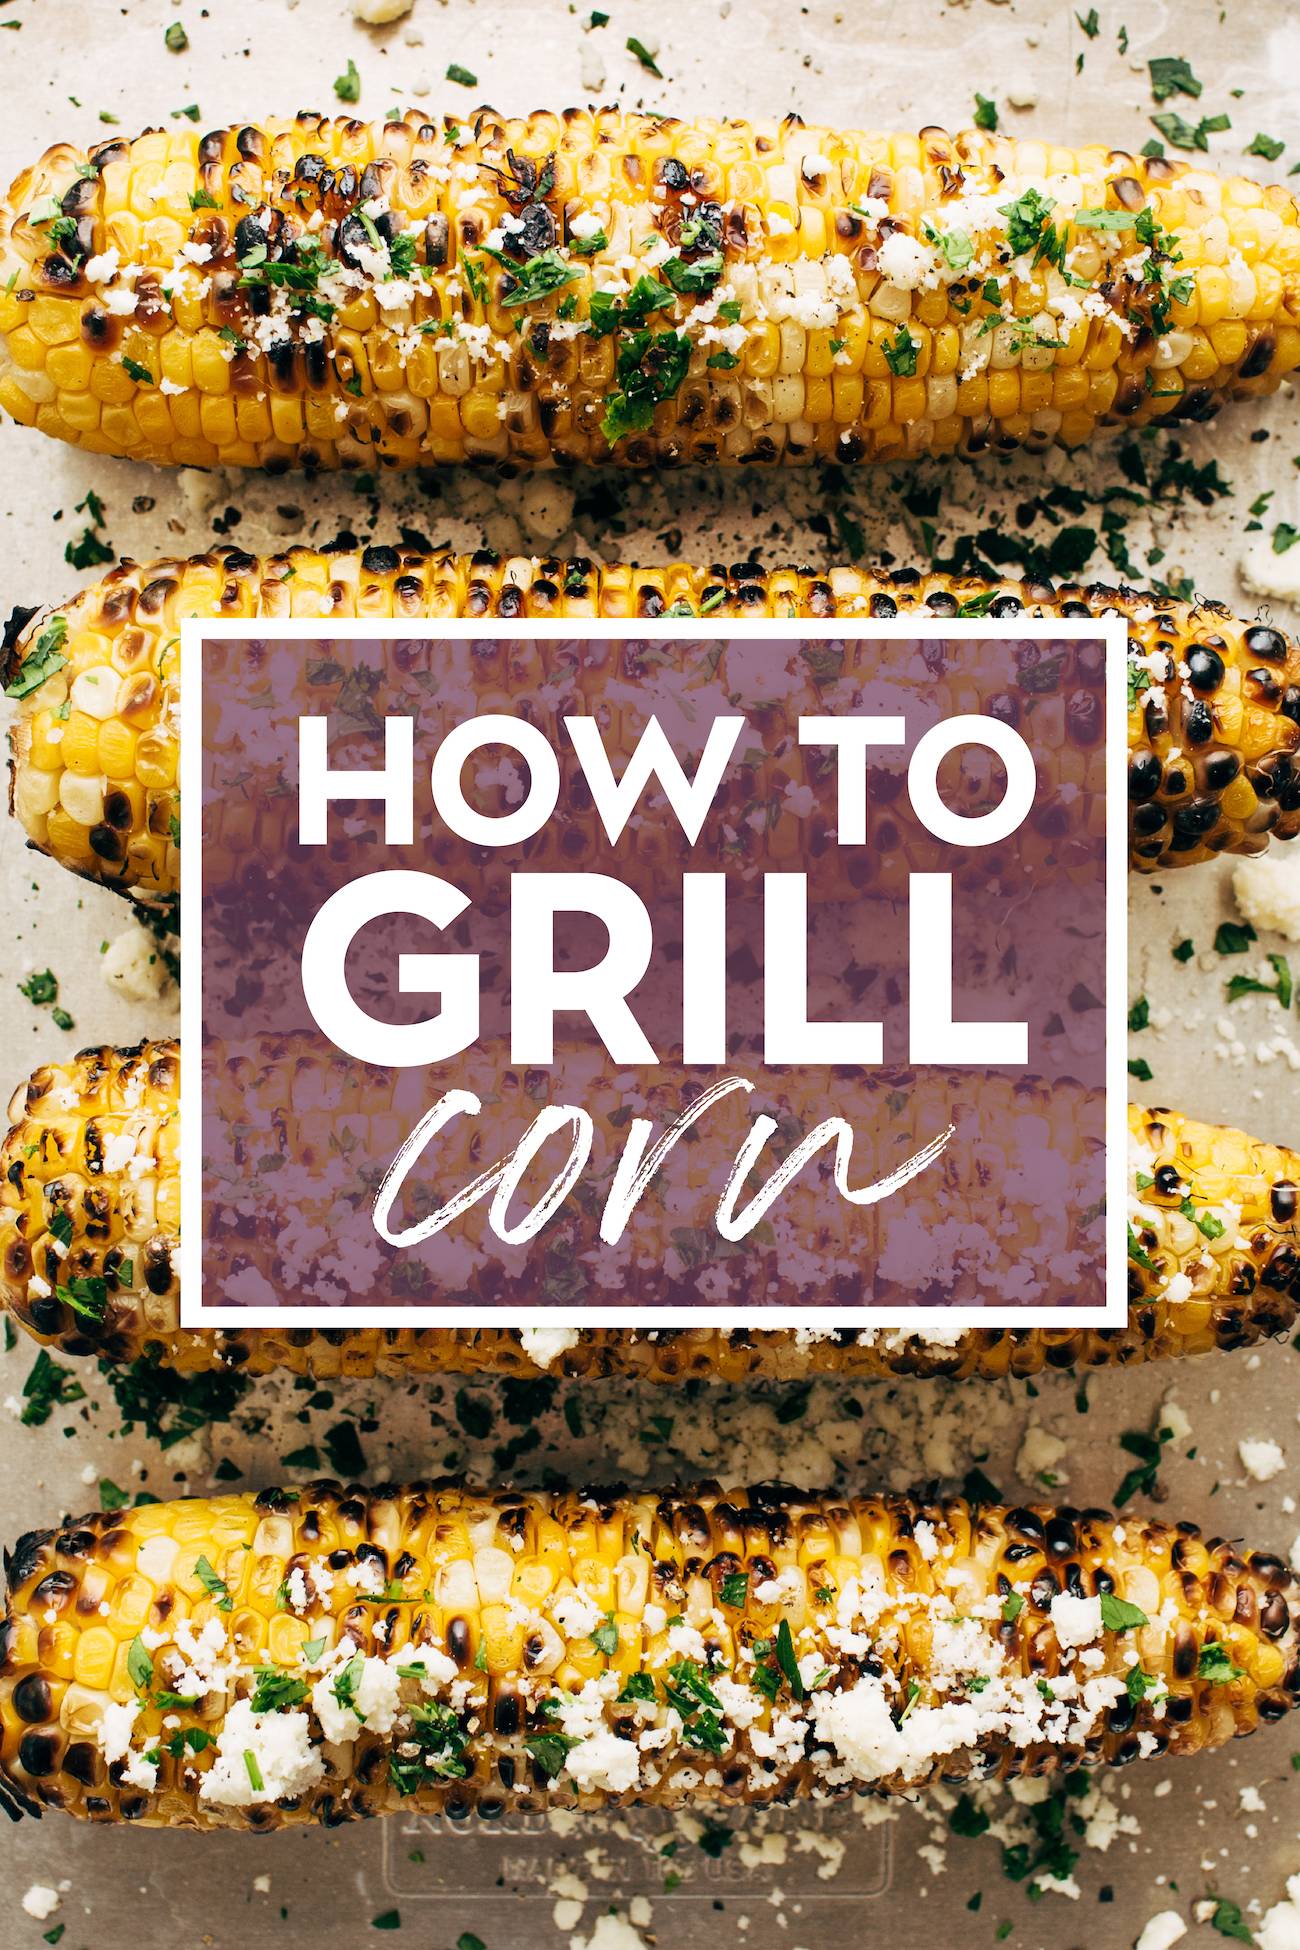 Four ears of grilled corn with text overlay that says 